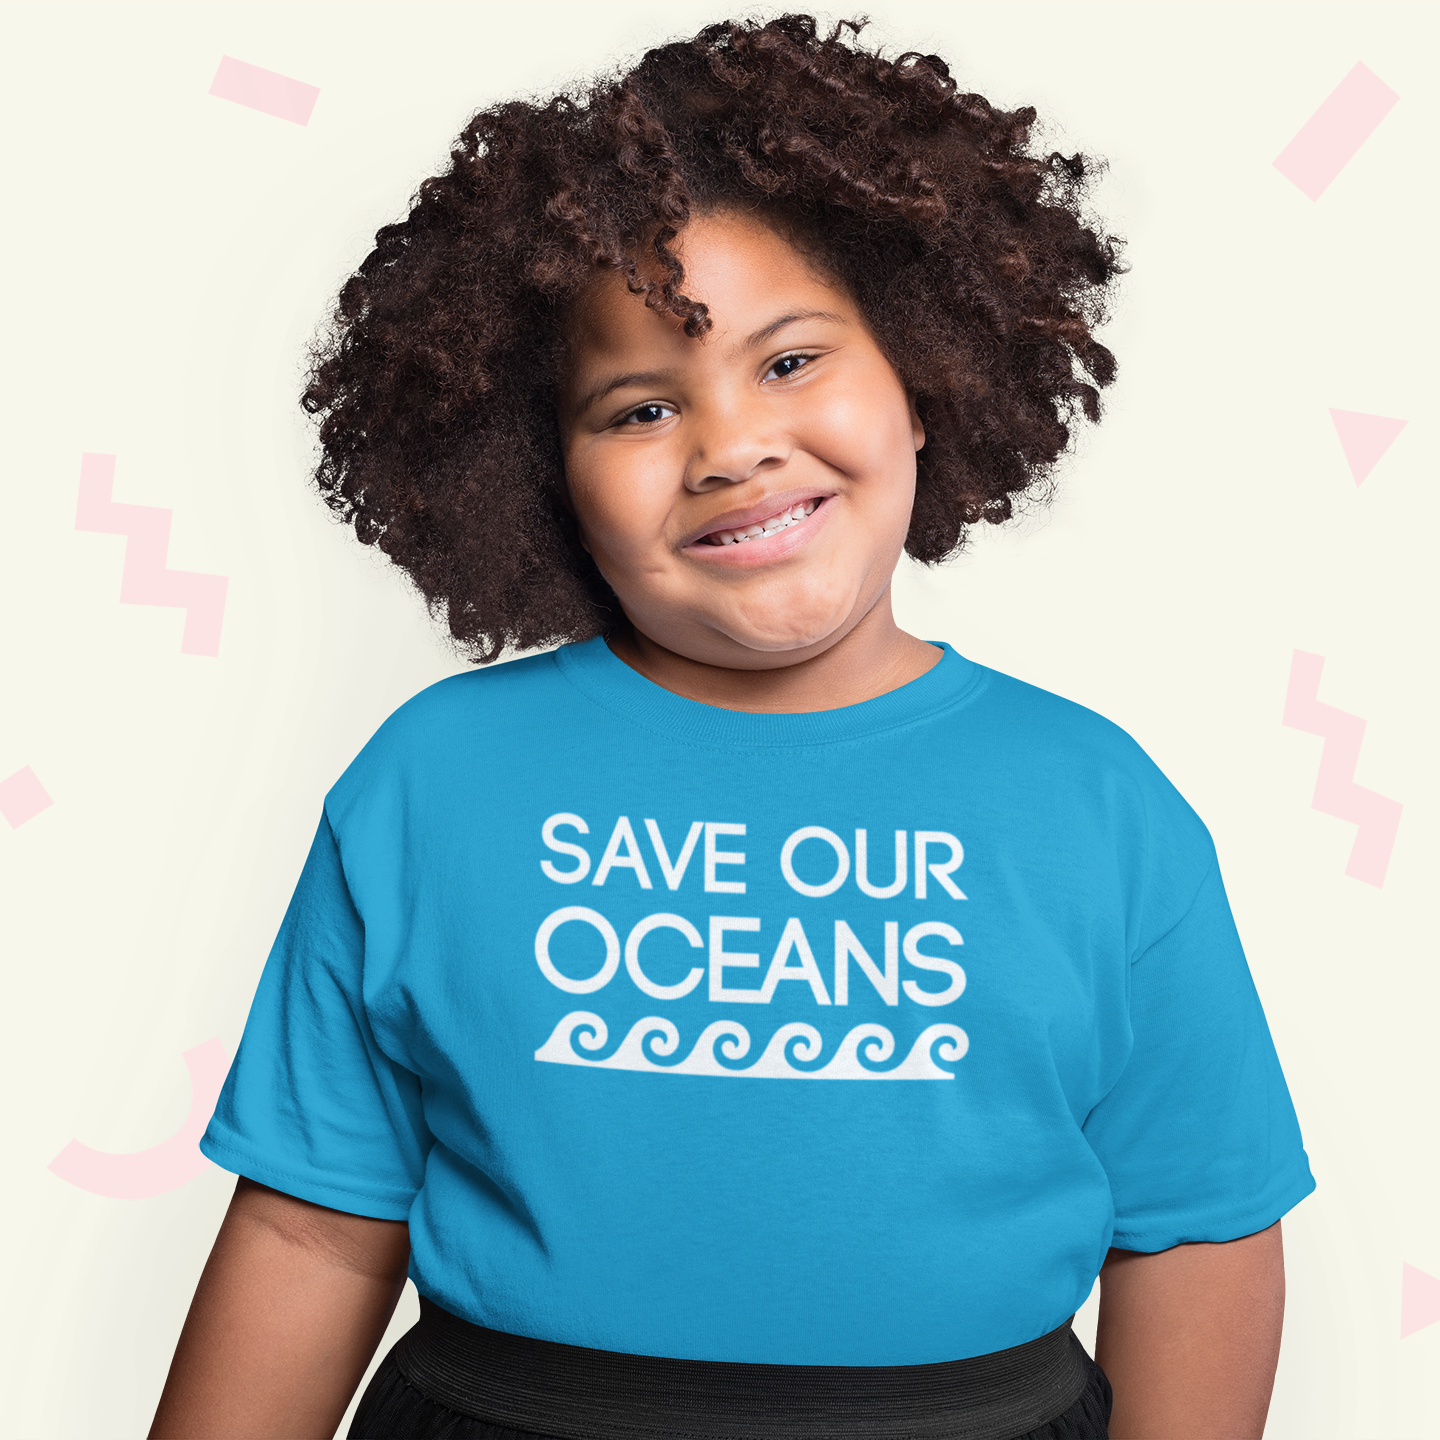 'Save our oceans' kids shortsleeve shirt